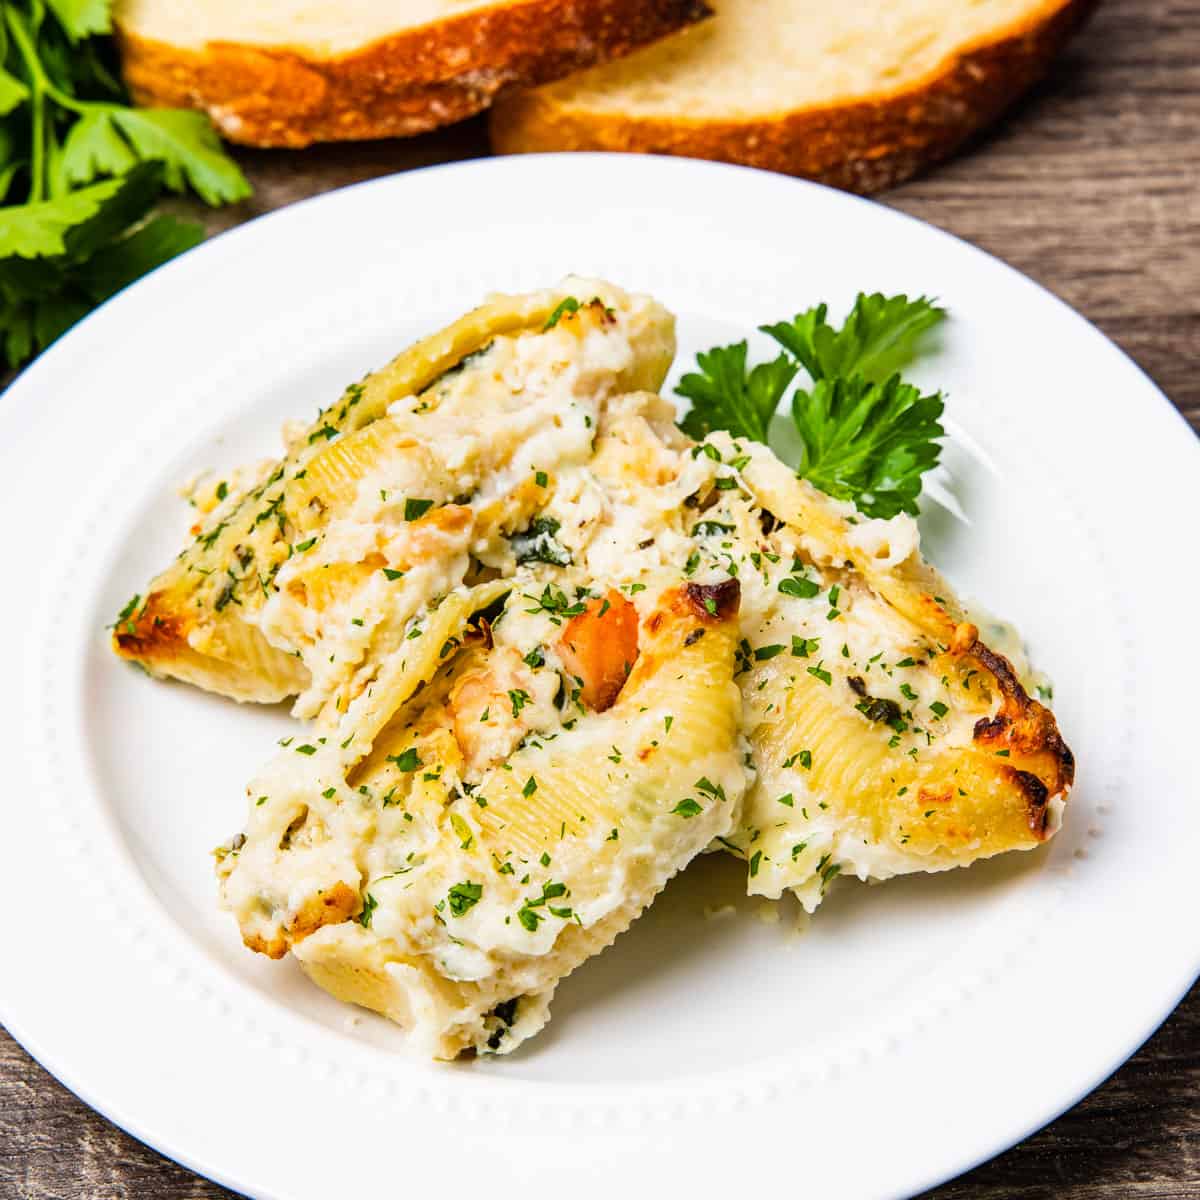 A serving of baked pasta shells stuffed with a seafood and ricotta filling covered in a creamy sauce.